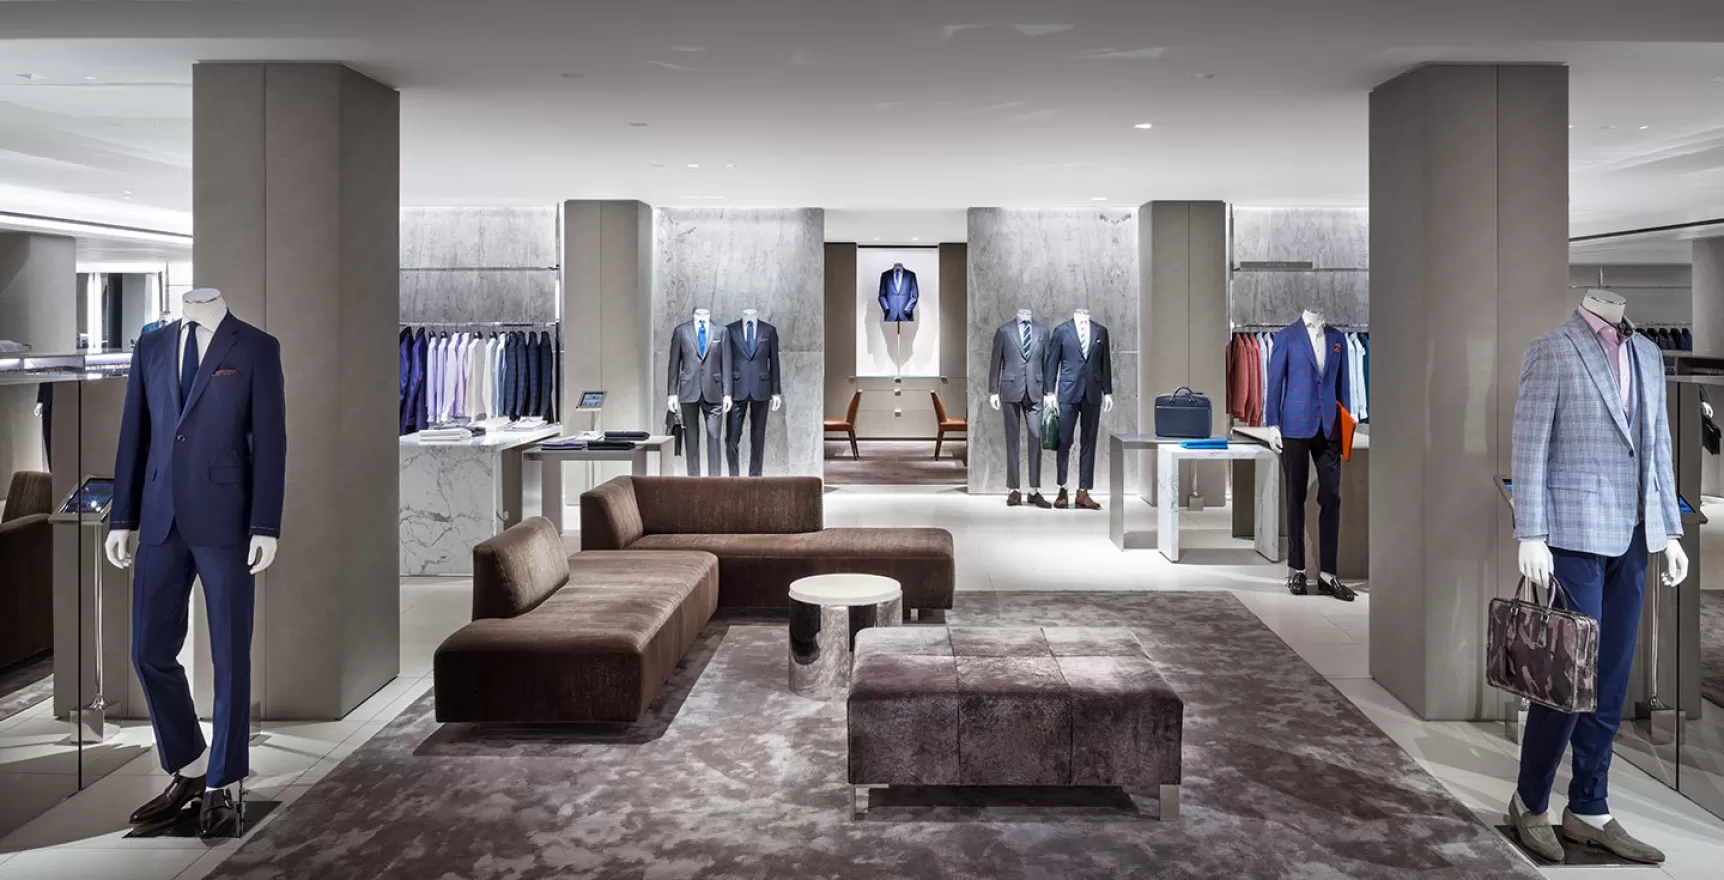 Barneys New York by Steven Harris Architects and Rees Roberts + Partners:  2016 Best of Year Winner for Mixed Retail - Interior Design